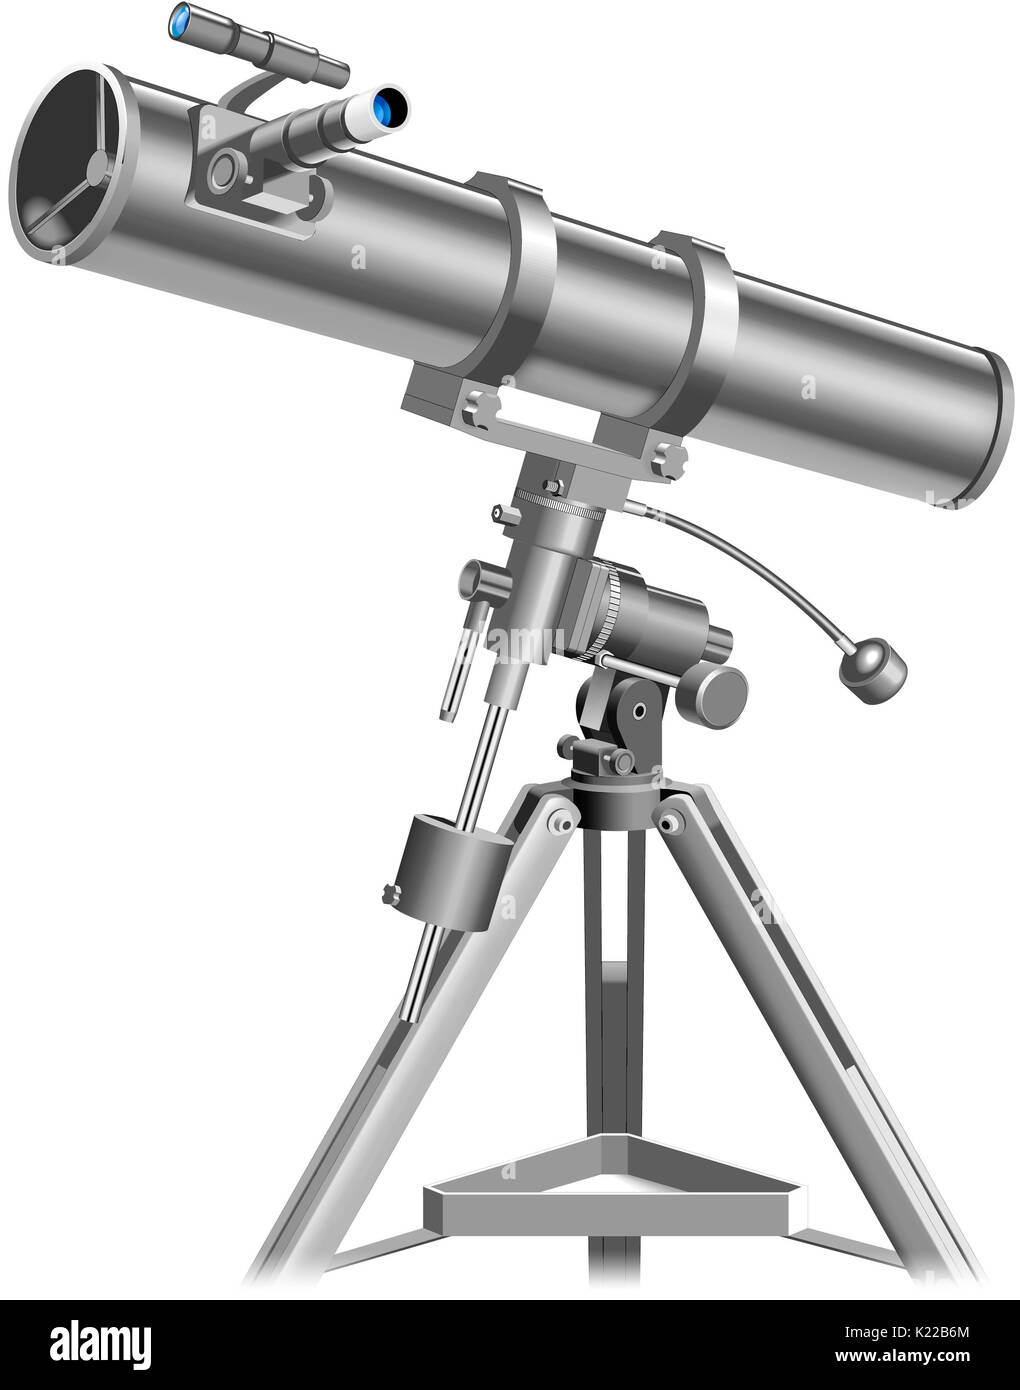 Optical instrument that uses an objective mirror to observe celestial bodies. Stock Photo